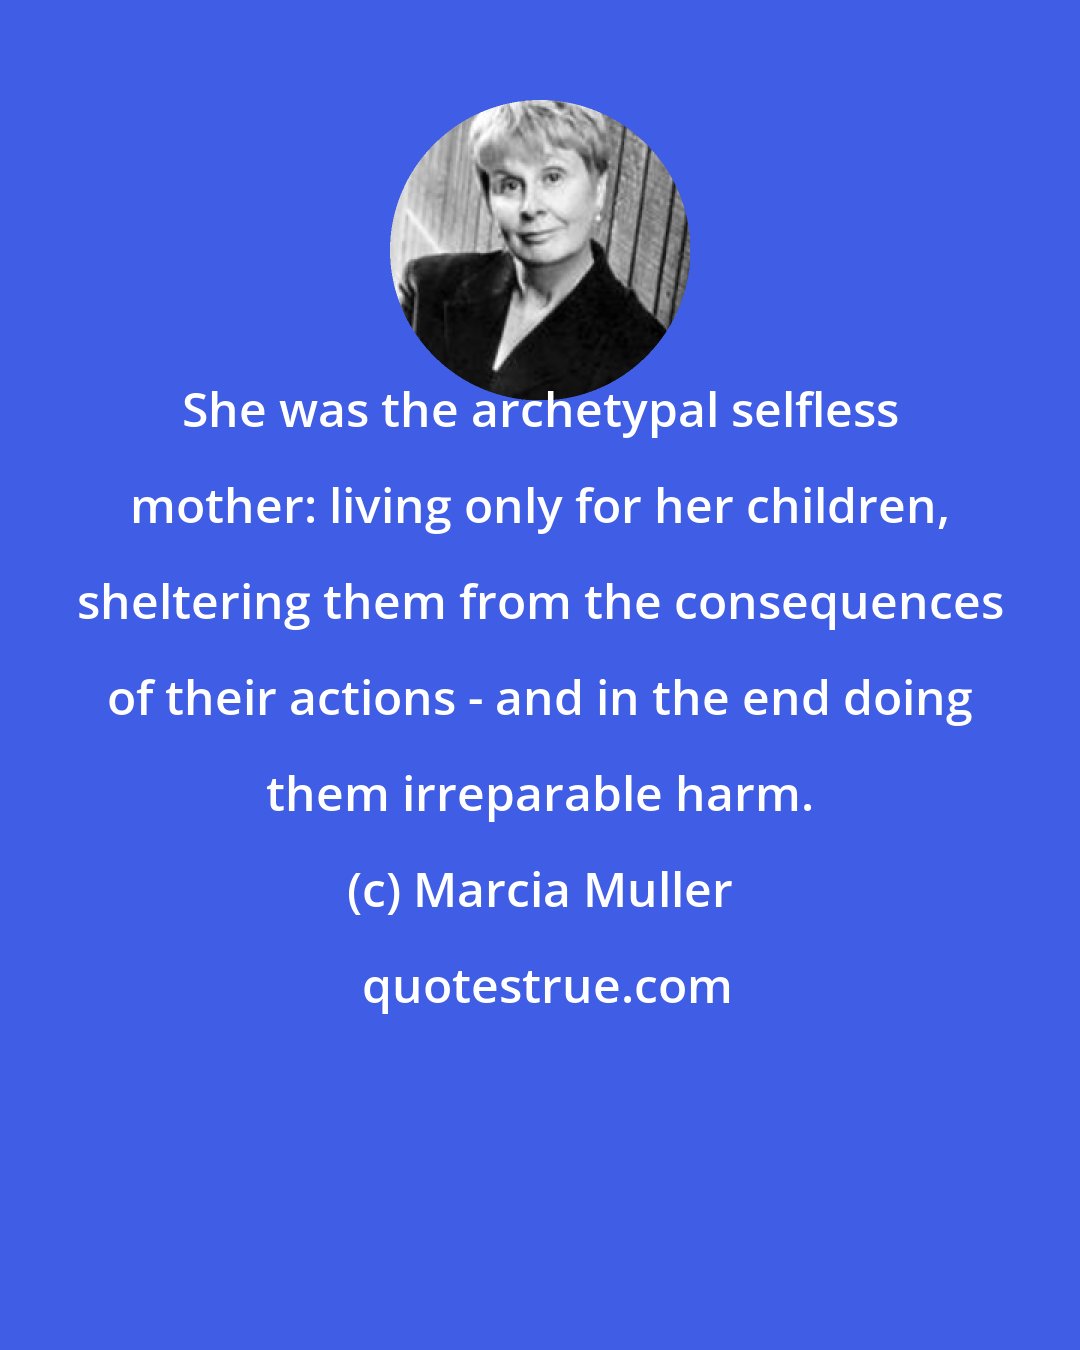 Marcia Muller: She was the archetypal selfless mother: living only for her children, sheltering them from the consequences of their actions - and in the end doing them irreparable harm.